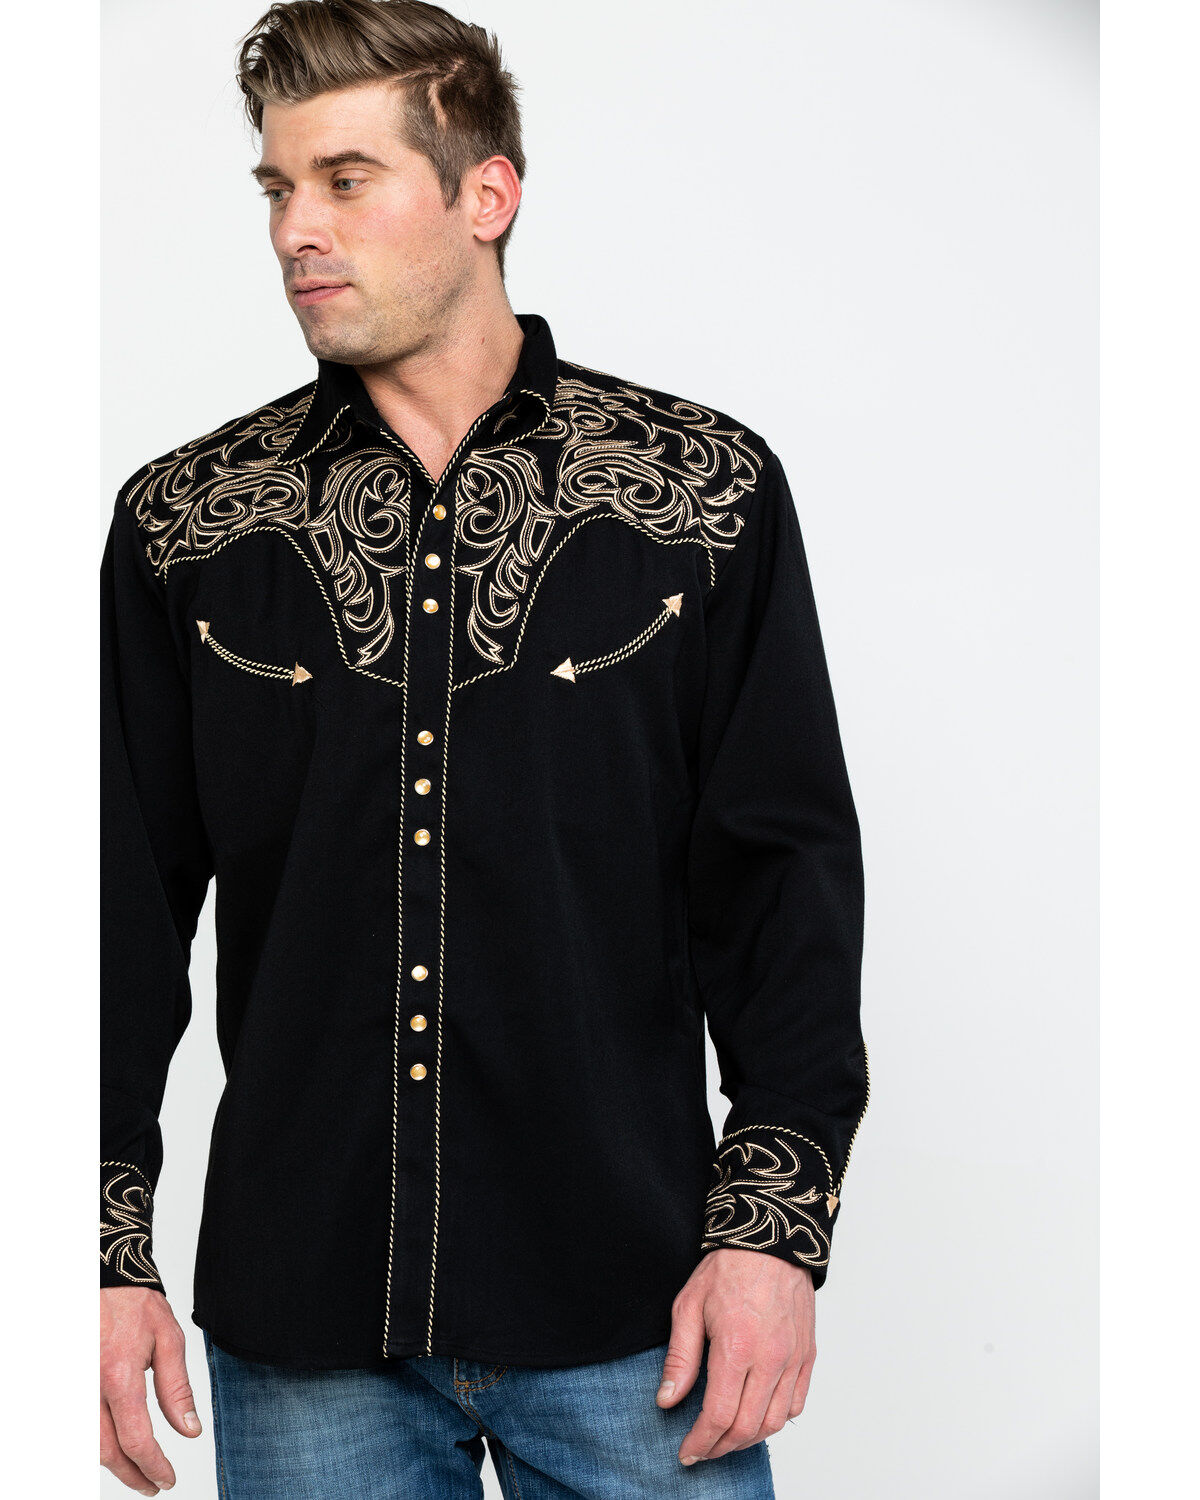 Scully Men's Black Embroidered Scroll 